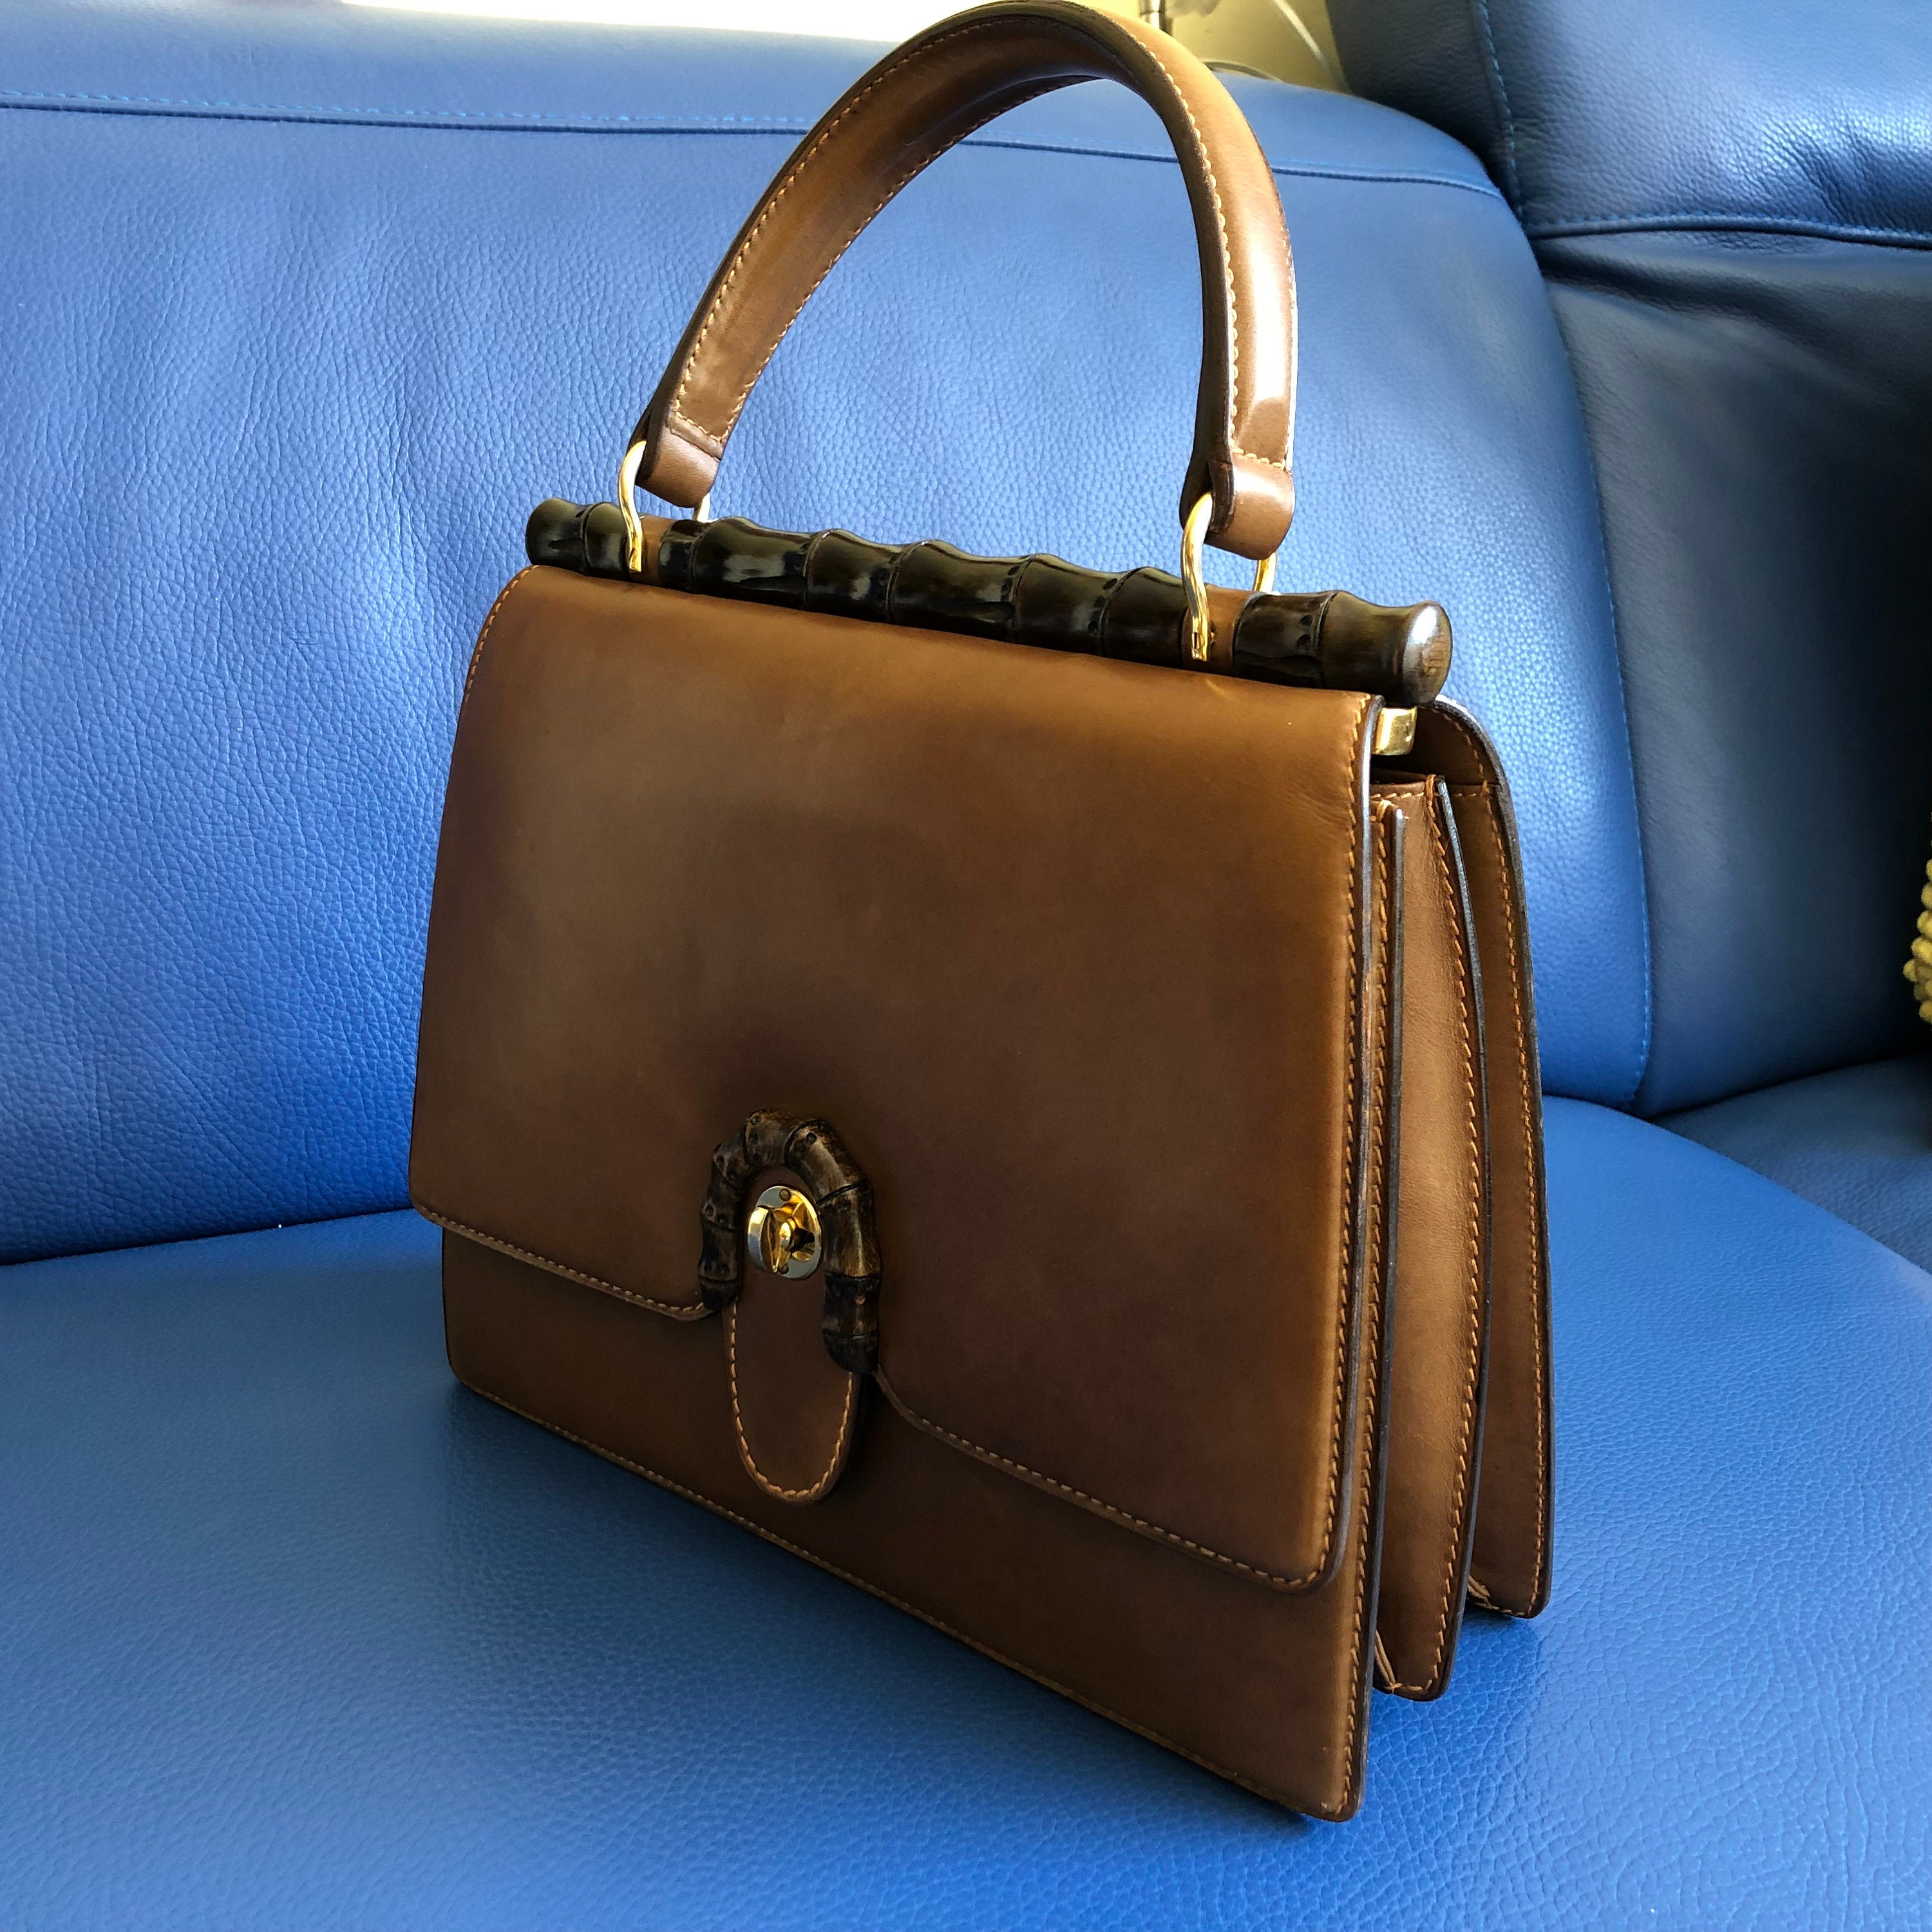 Stunning 1950's Brown Leather Gucci Original Handbag Made in Italy Small  Purse Gold Accents